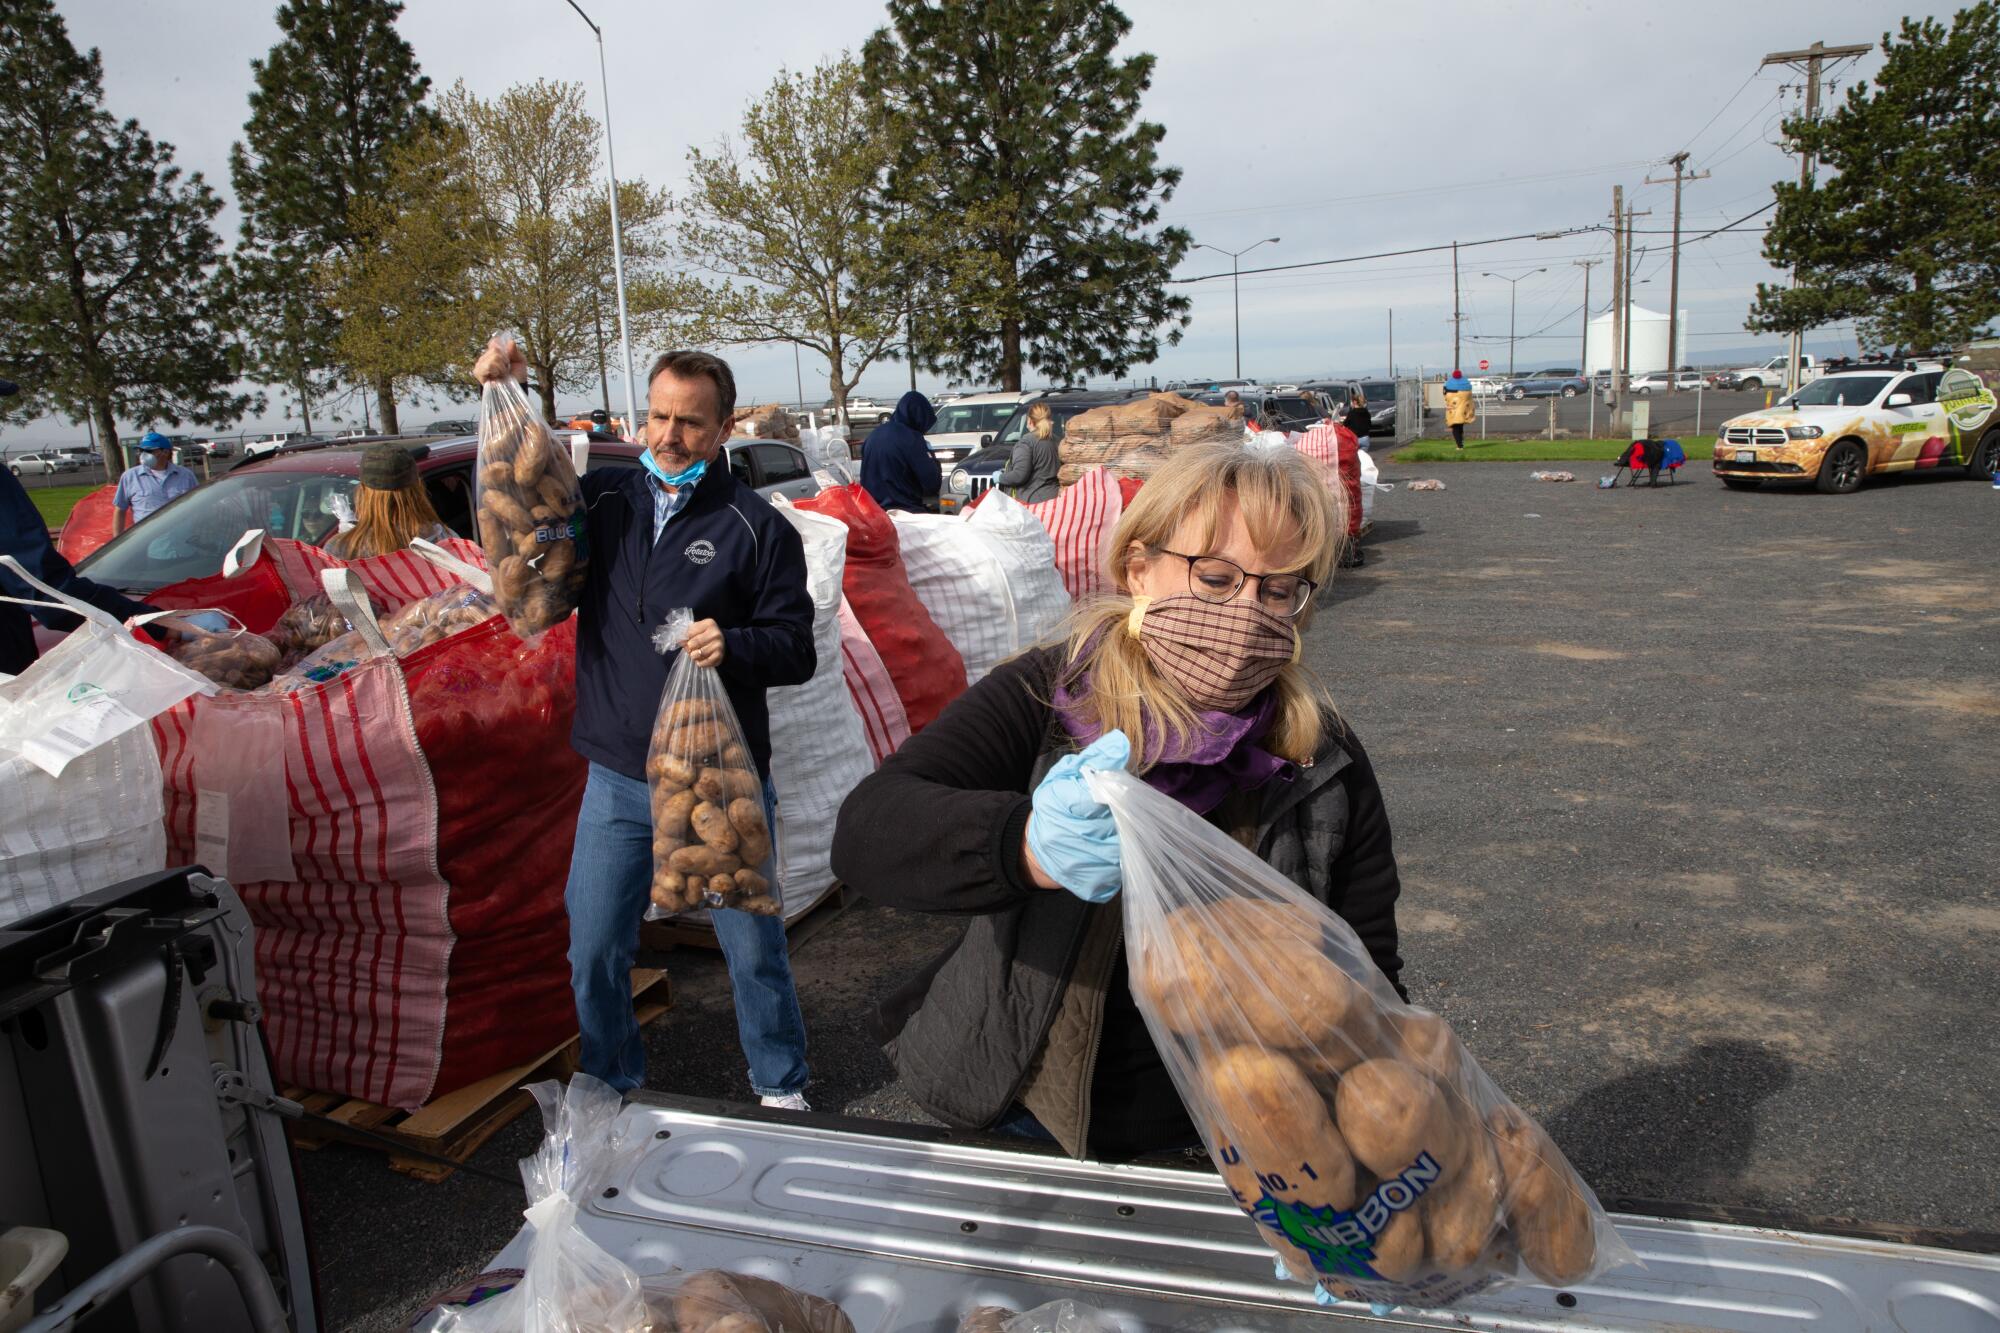 Chris Voigt, executive director of the Washington State Potato Commission, and Washington state Rep. Mary Dye (R-Pomeroy) load up a pickup truck during a free potato giveaway at the Grant County Fairgrounds in Moses Lake, Wash..